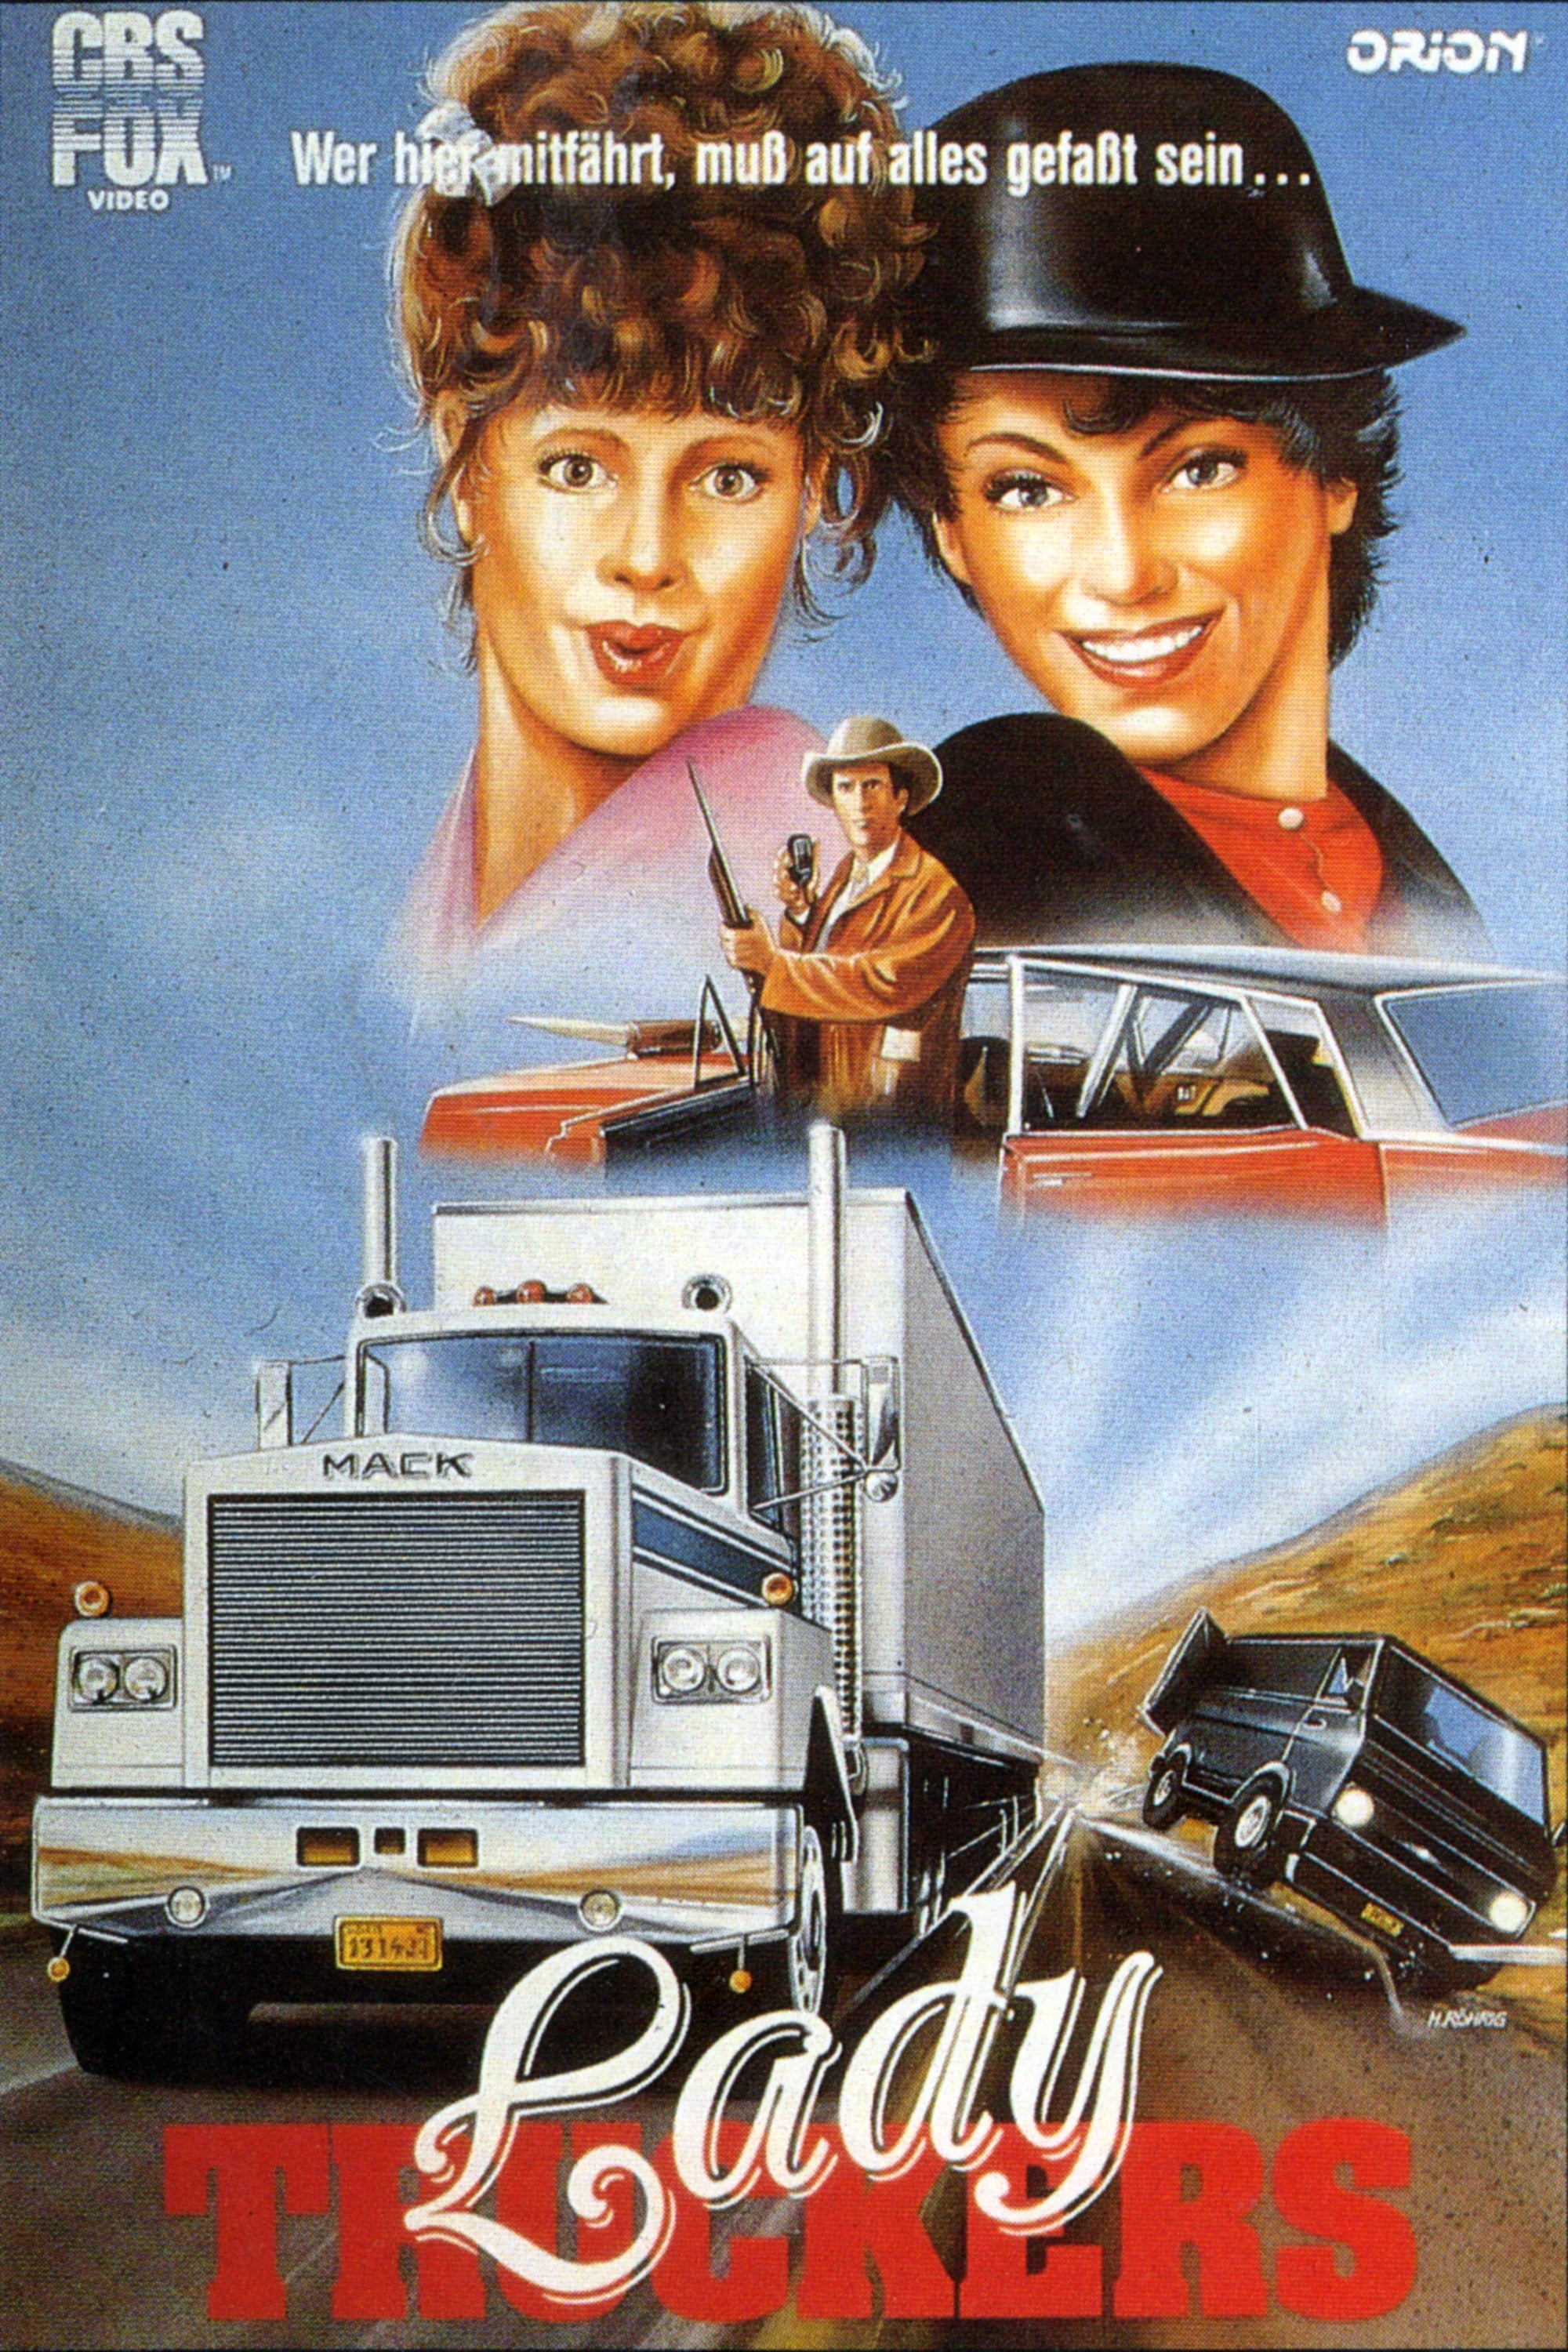 Lady Truckers (1979)